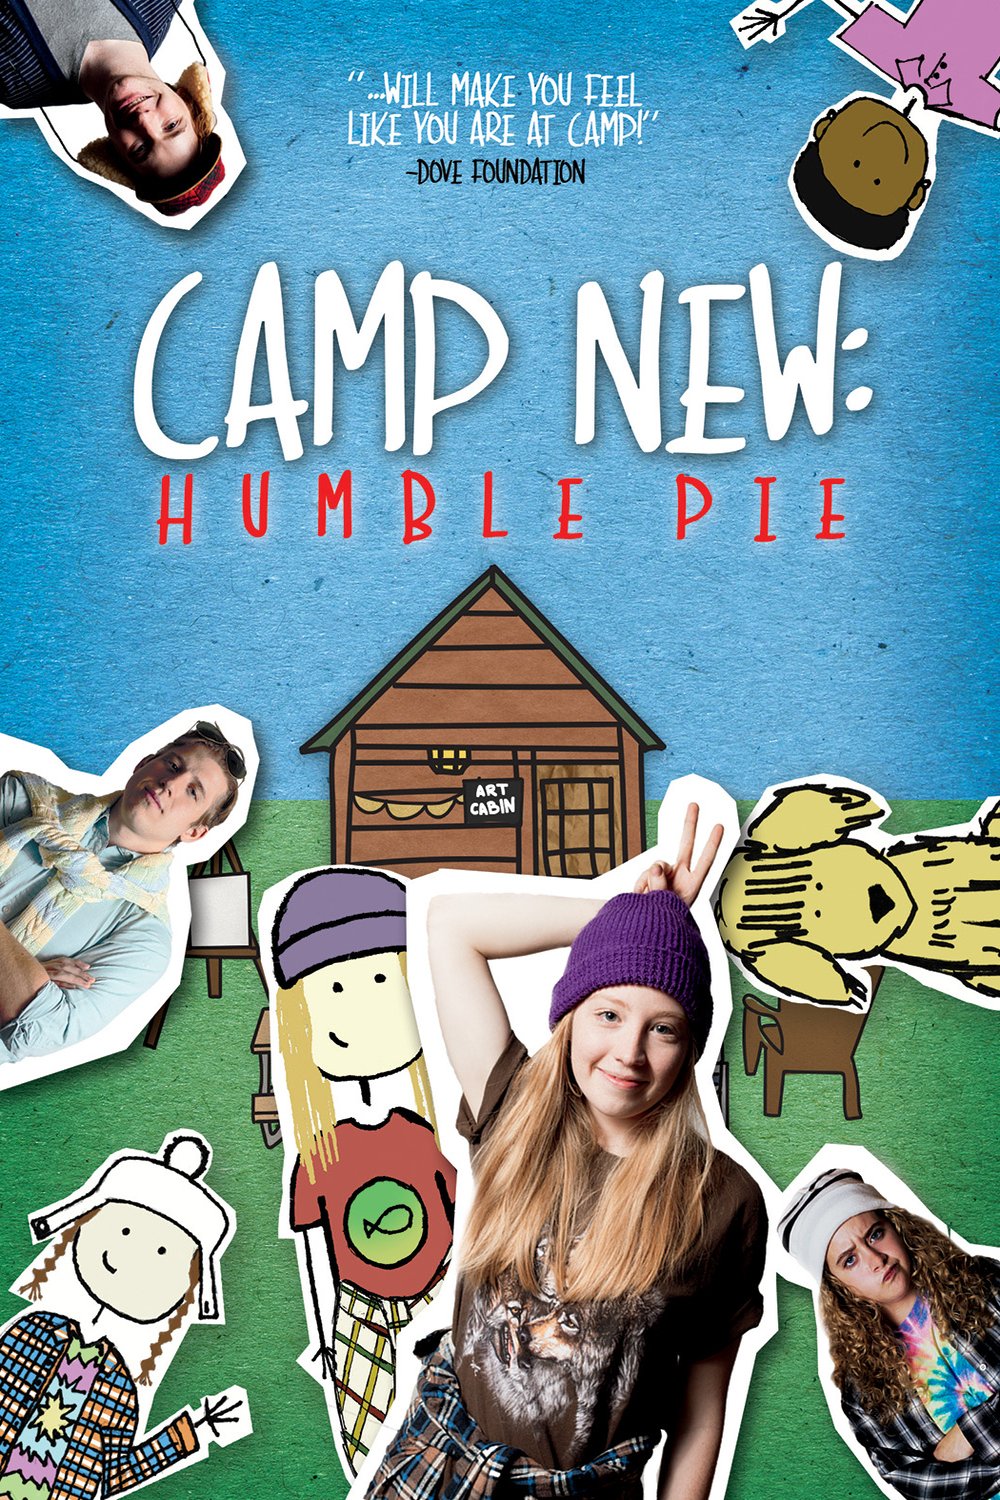 Poster of the movie Camp New: Humble Pie